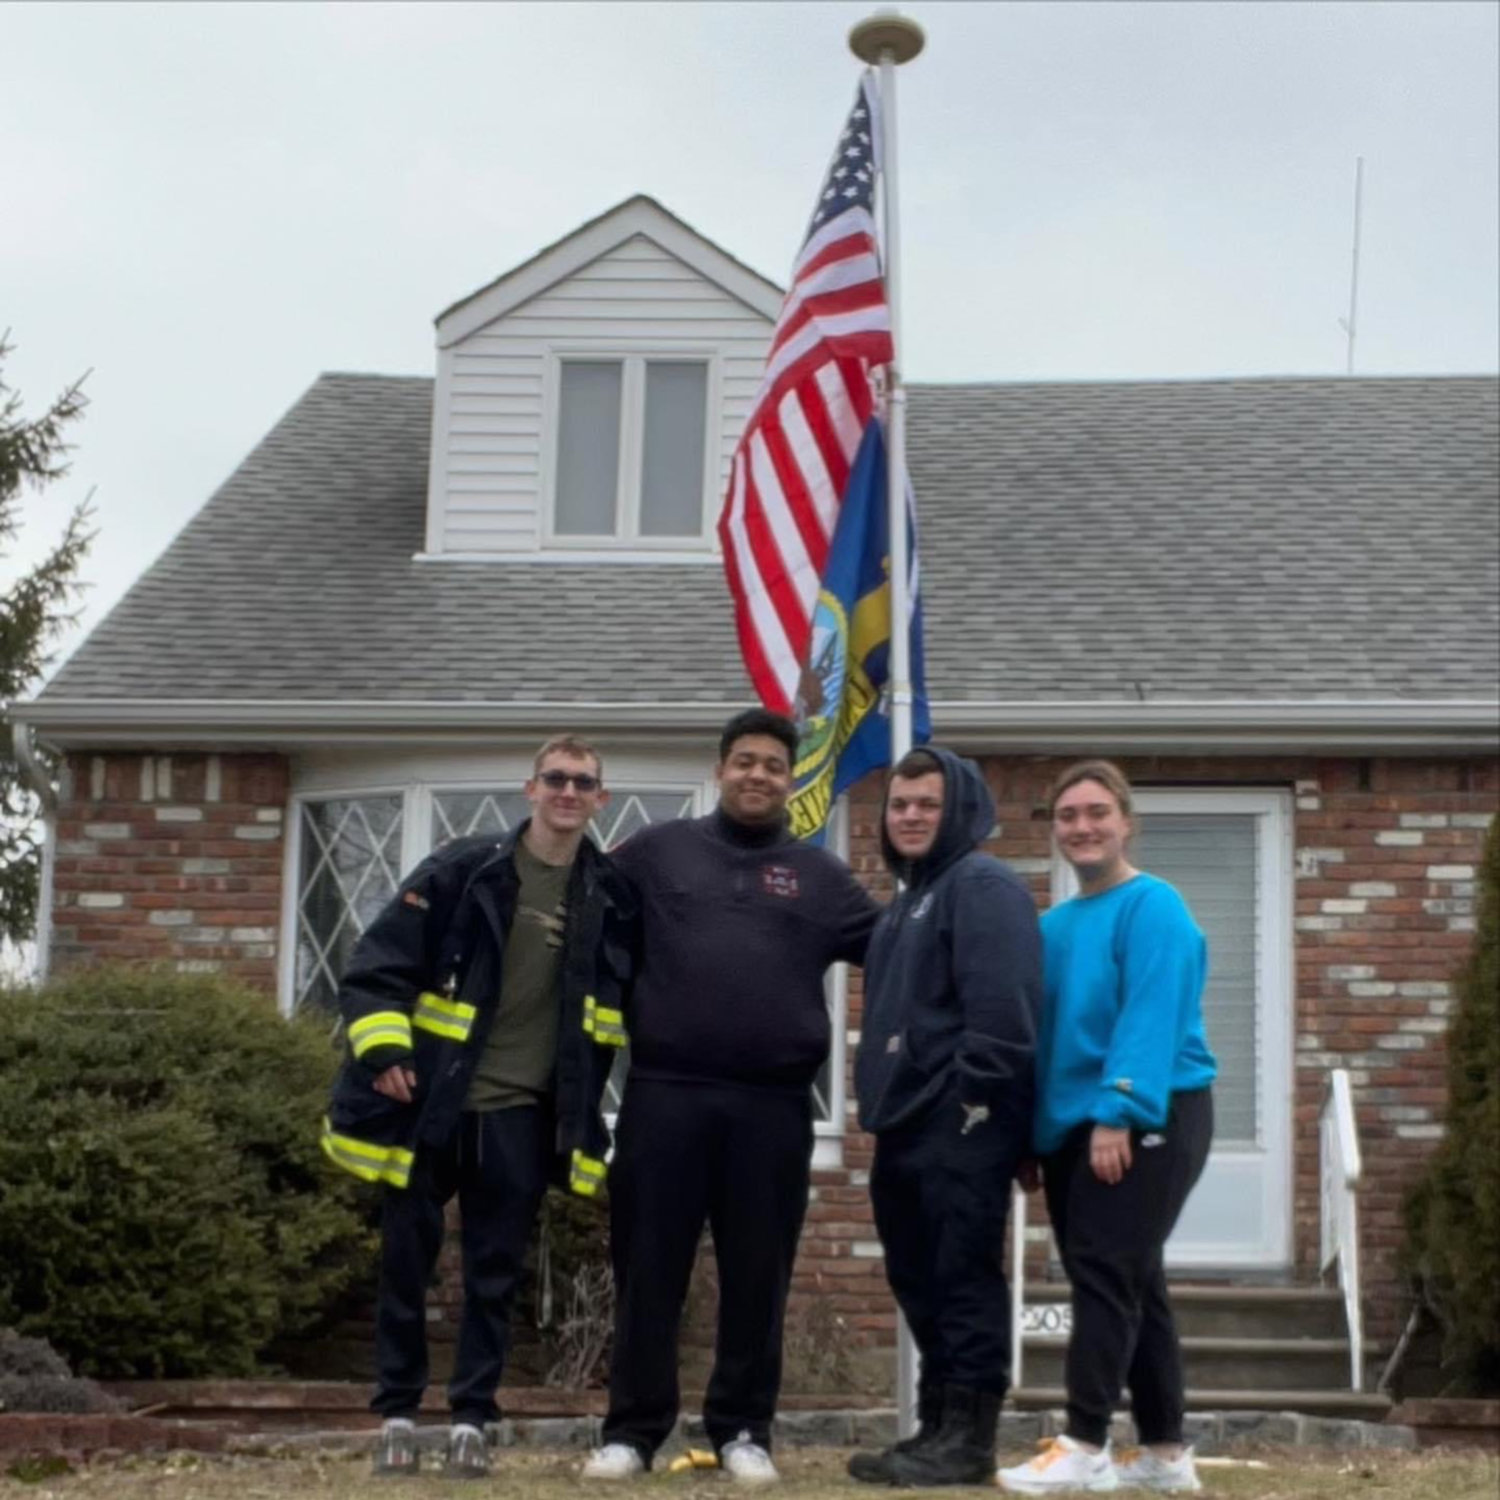 On Feb. 9, EMFD volunteers from left, Aidan Finneran, Omar Benthami, and Connor and Kasey Cheswick went to a vets house to fix his fence and flags.